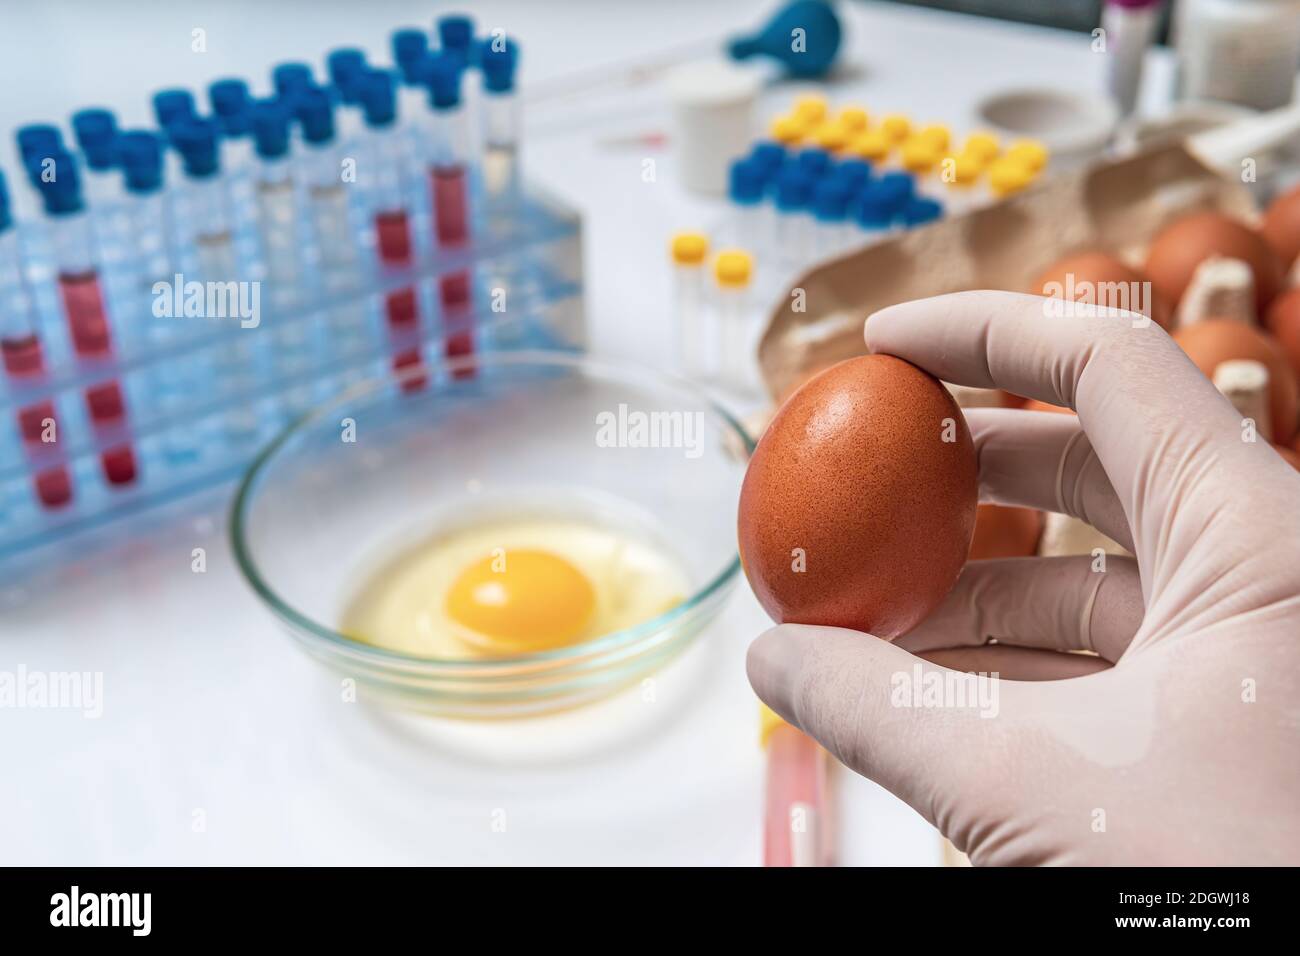 Food quality testing concept. Scientist is holding egg in hand in laboratory. Stock Photo